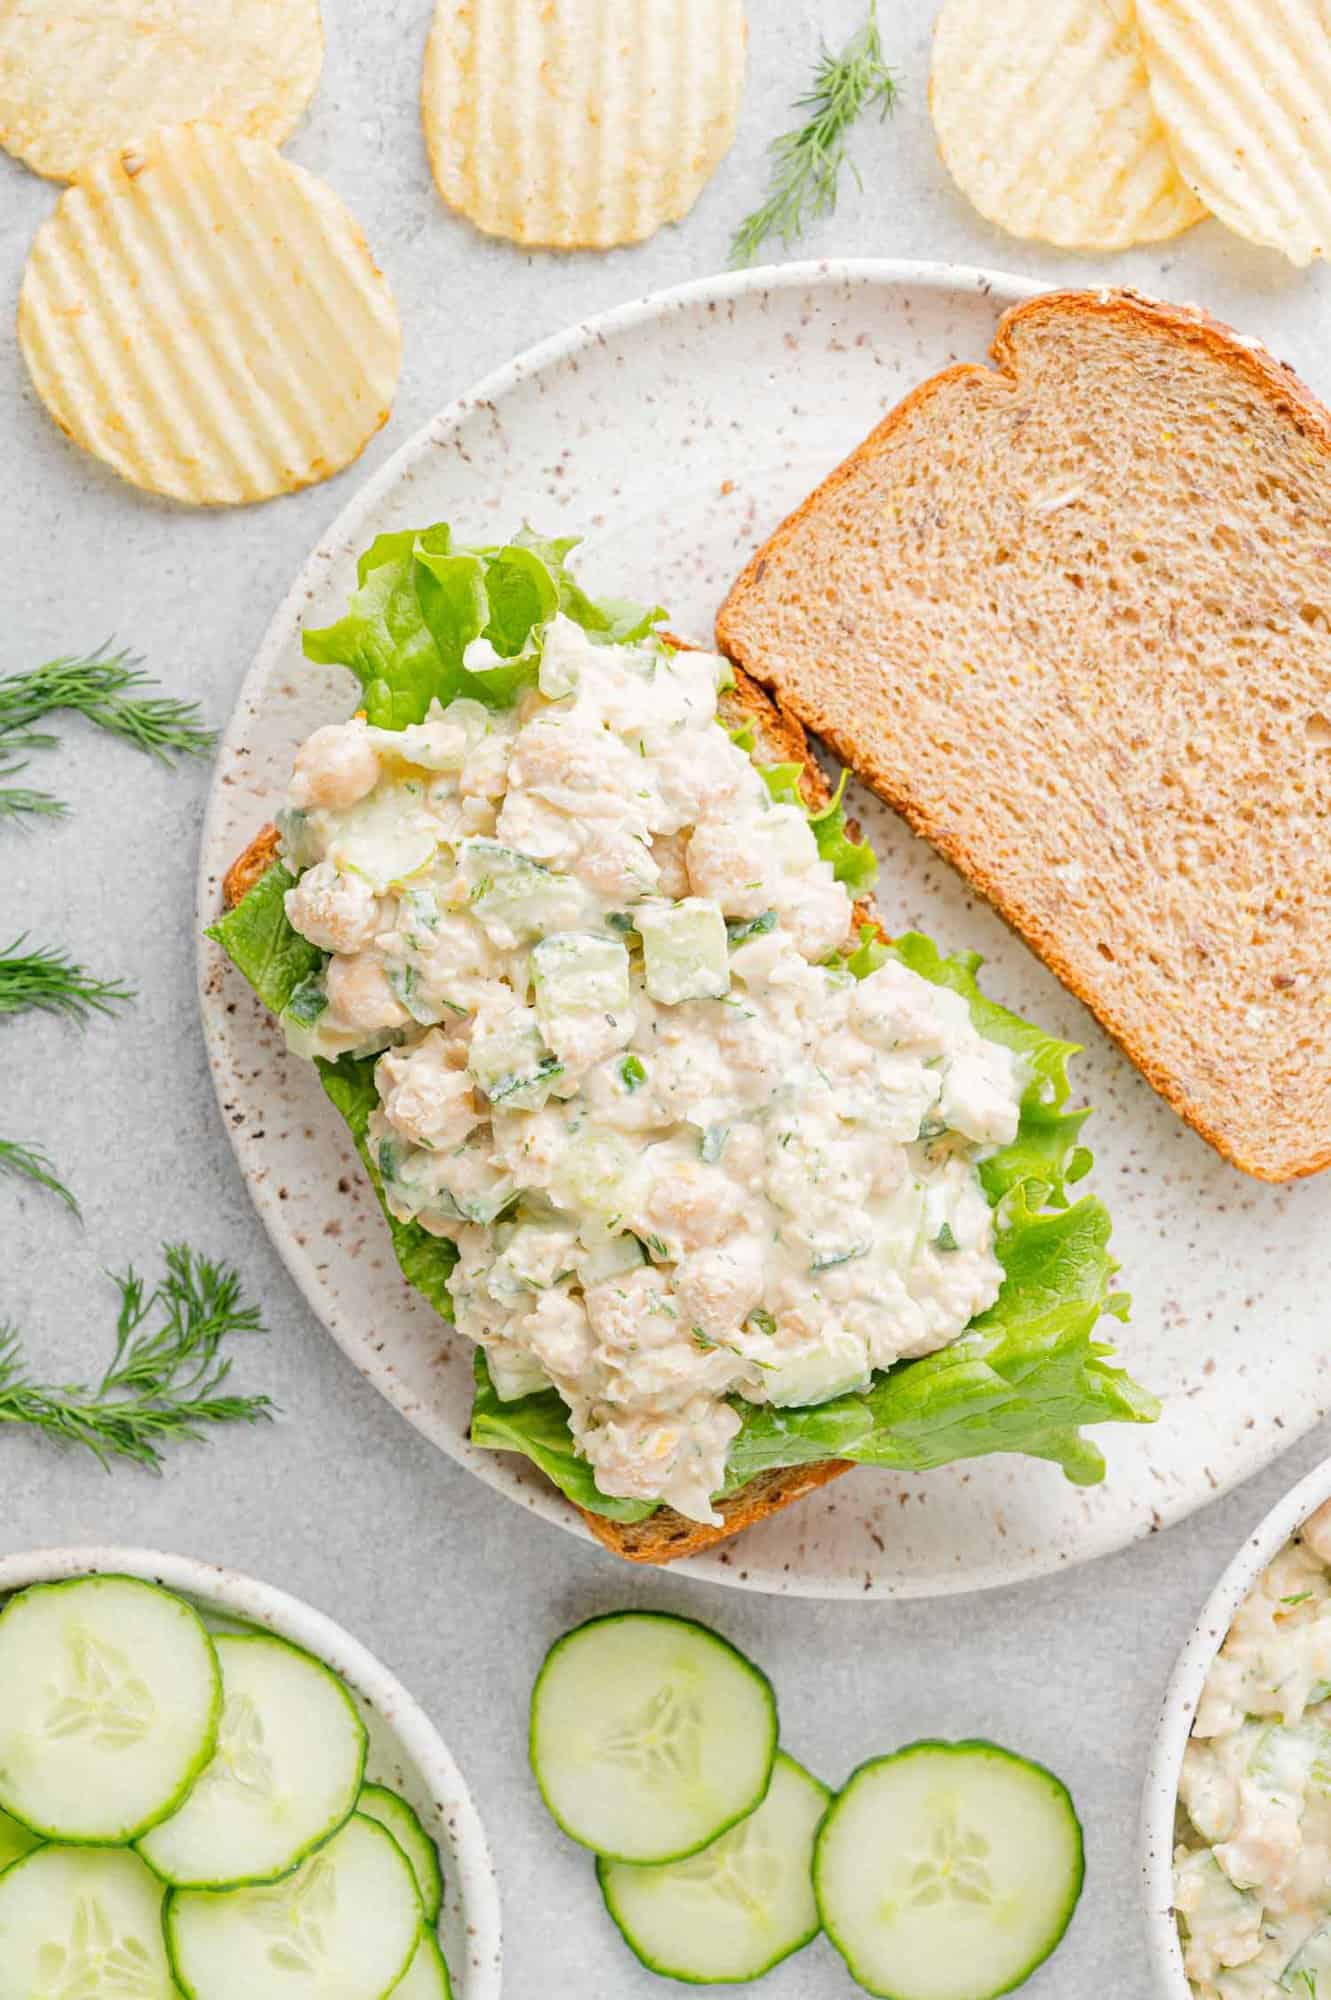 Overhead view of open faced chickpea salad sandwich.